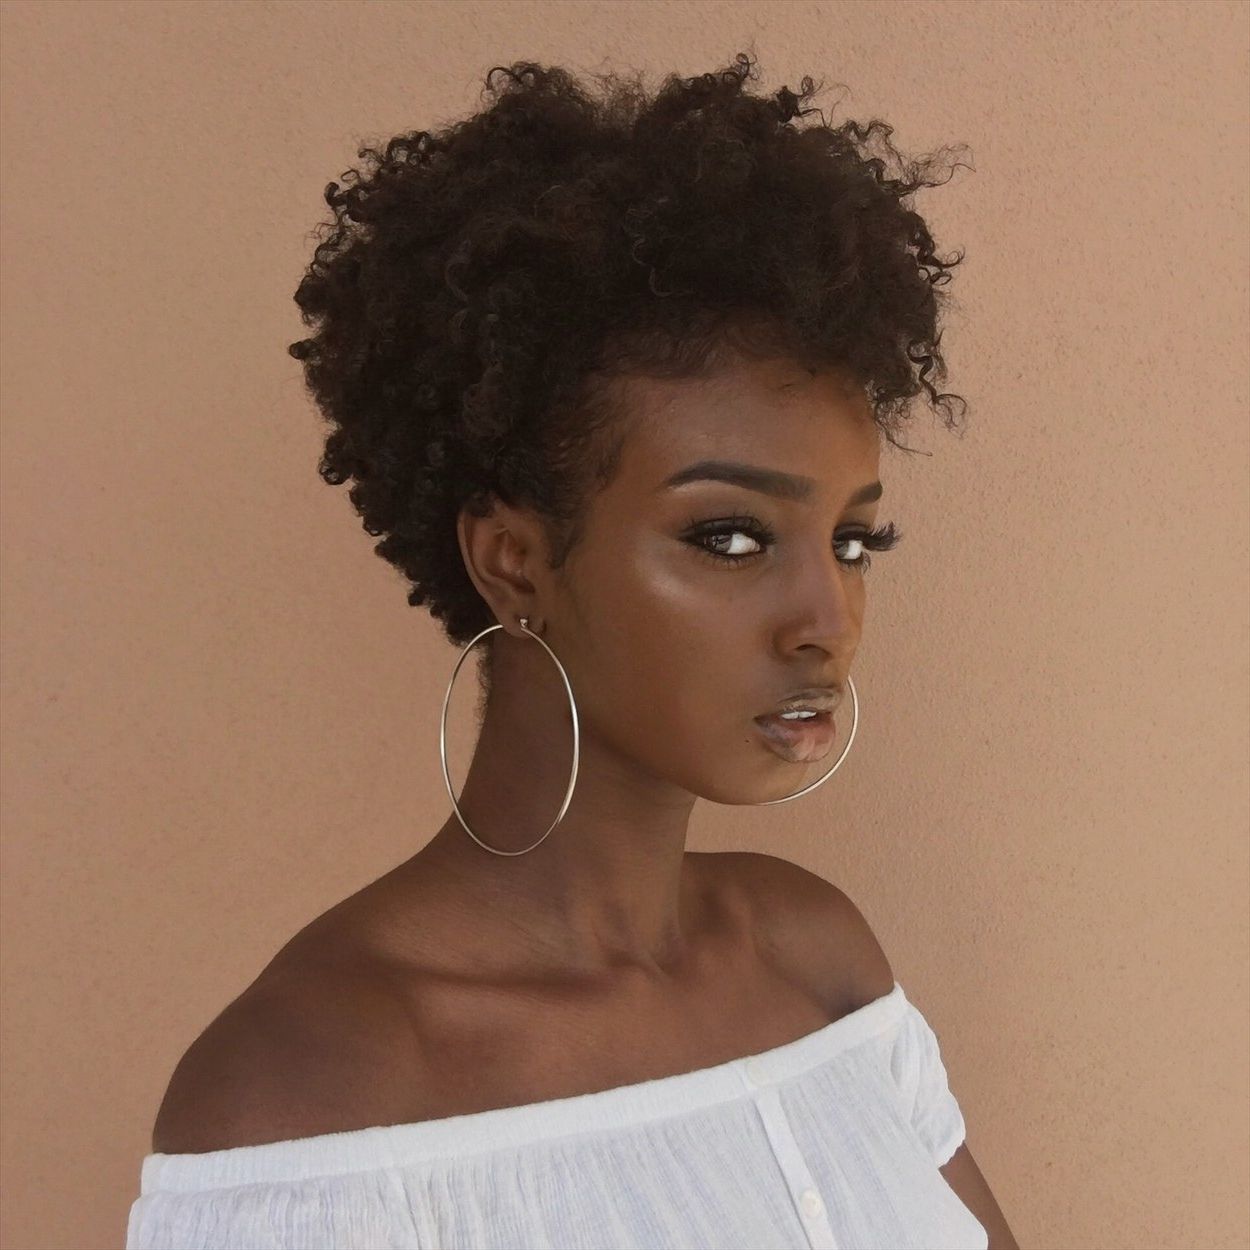 Glamour Pertaining To 2018 Short Black Pixie Hairstyles For Curly Hair (Gallery 10 of 20)